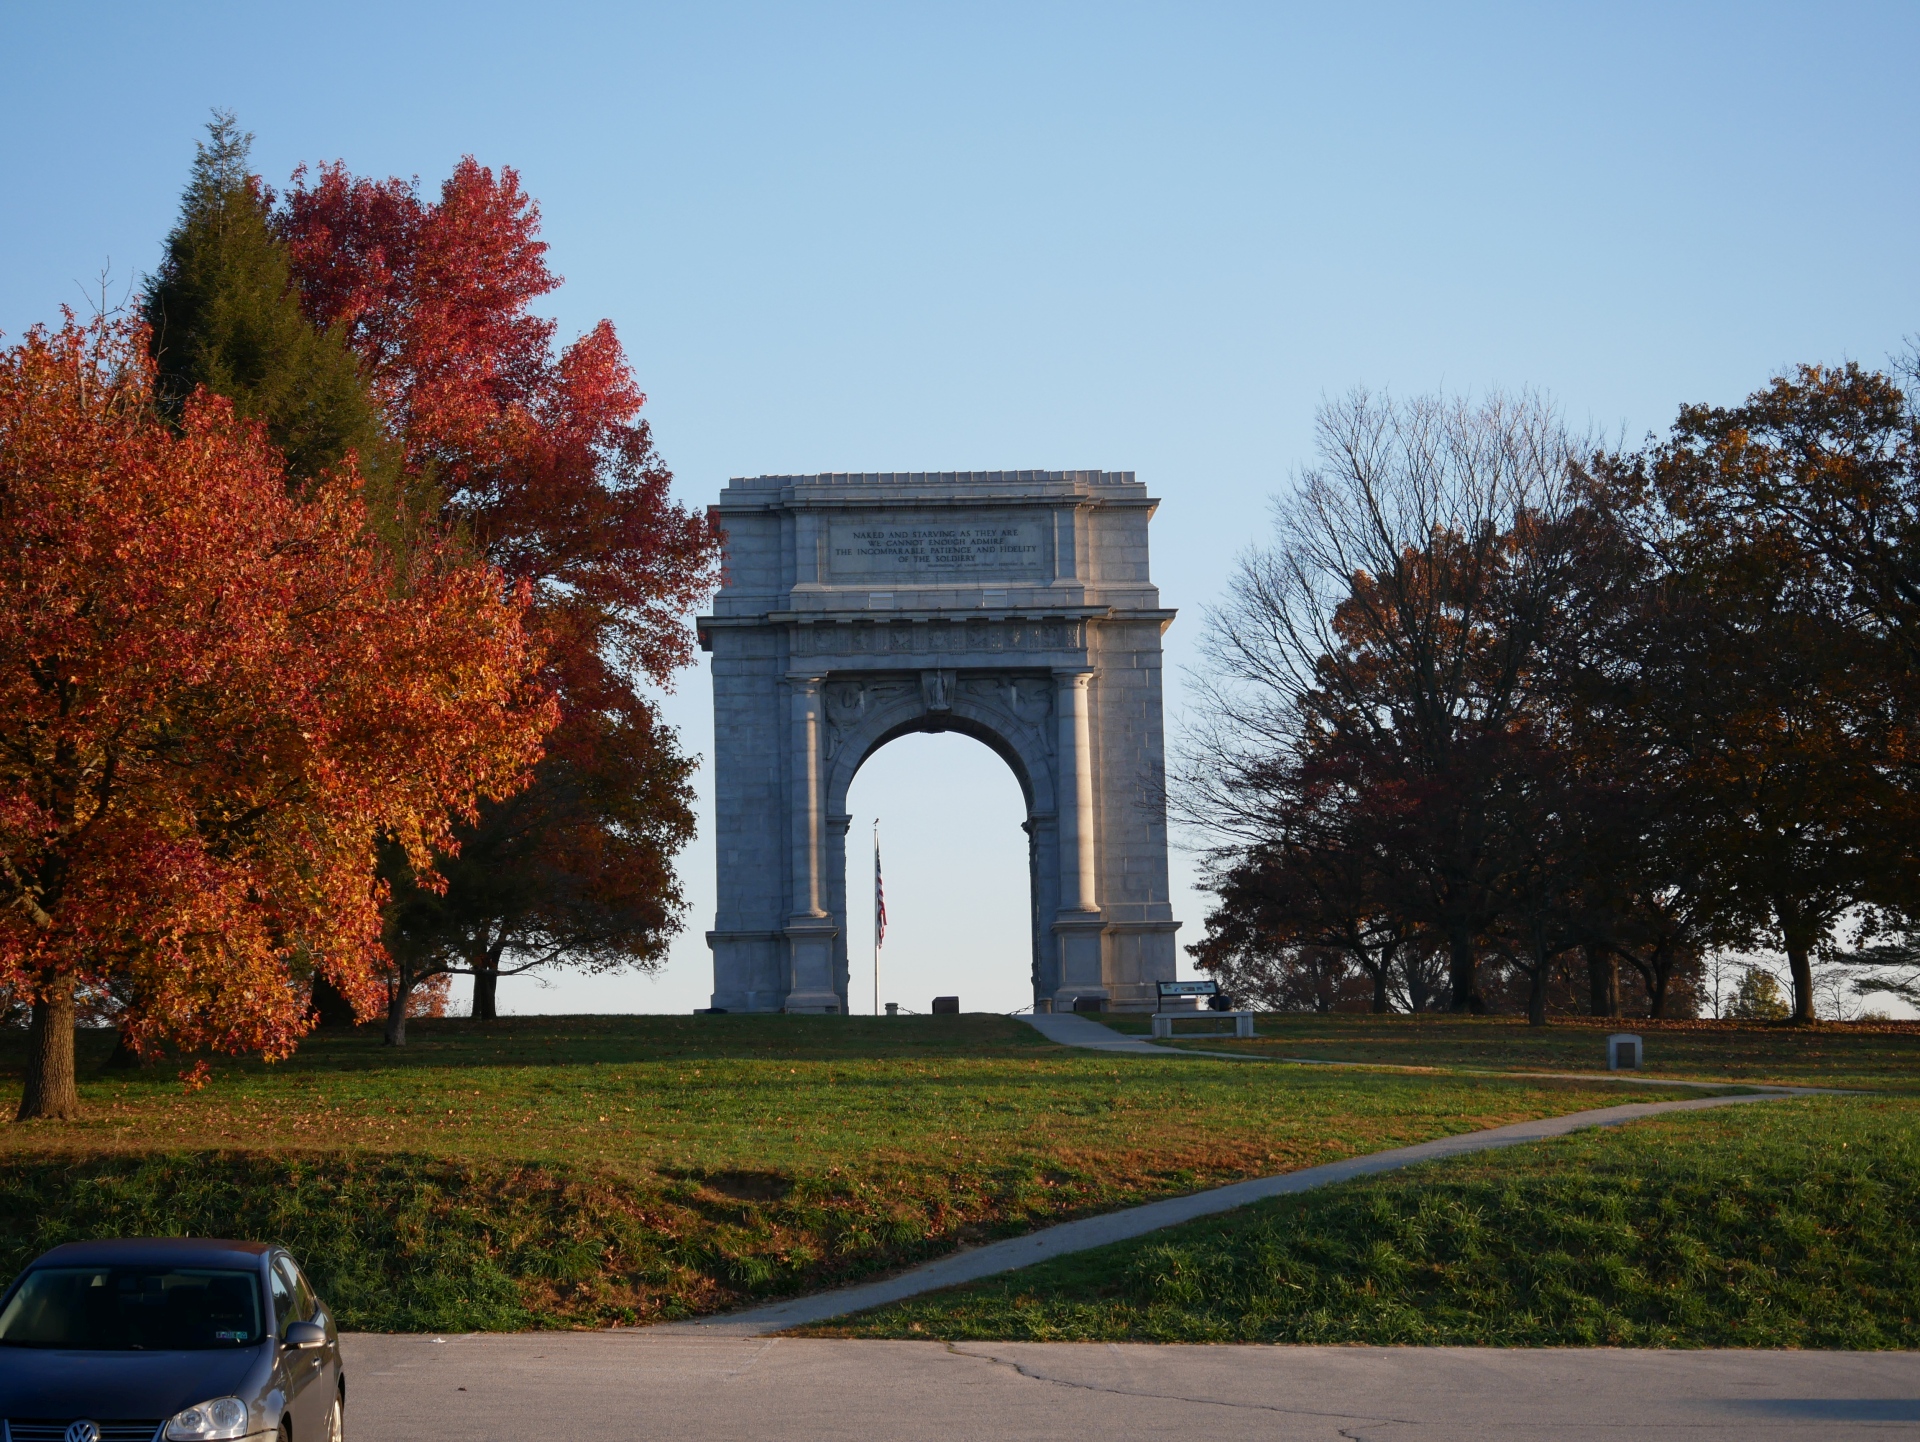 View of the National Memorial Arch from the parking lot, Fall 2020